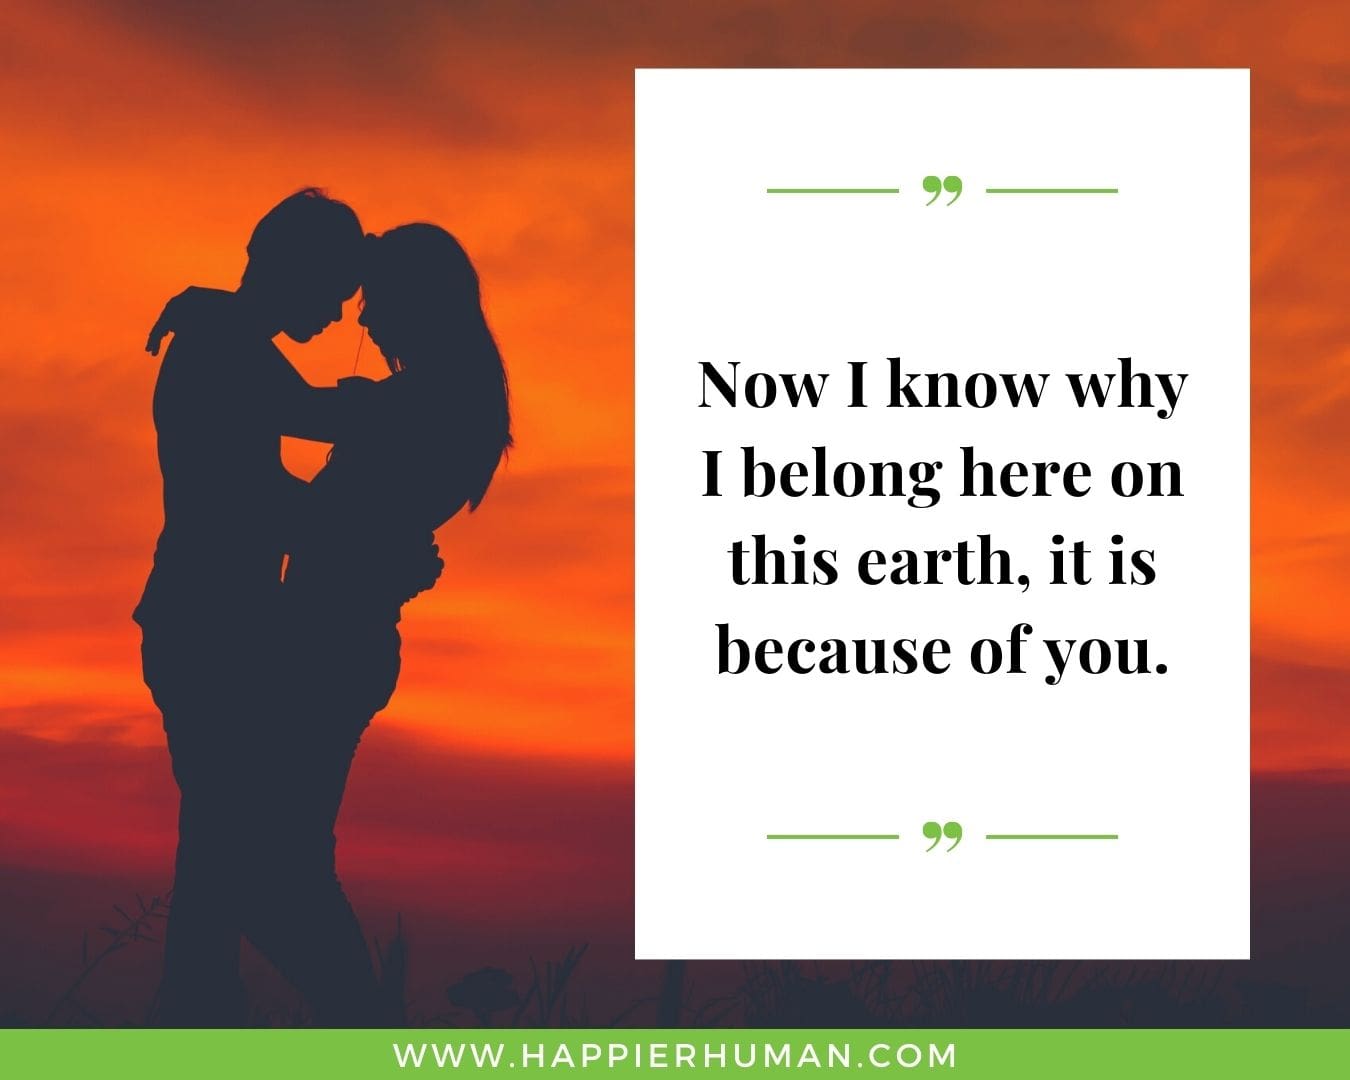 Short, Deep Love Quotes for Her - “Now I know why I belong here on this earth, it is because of you.”